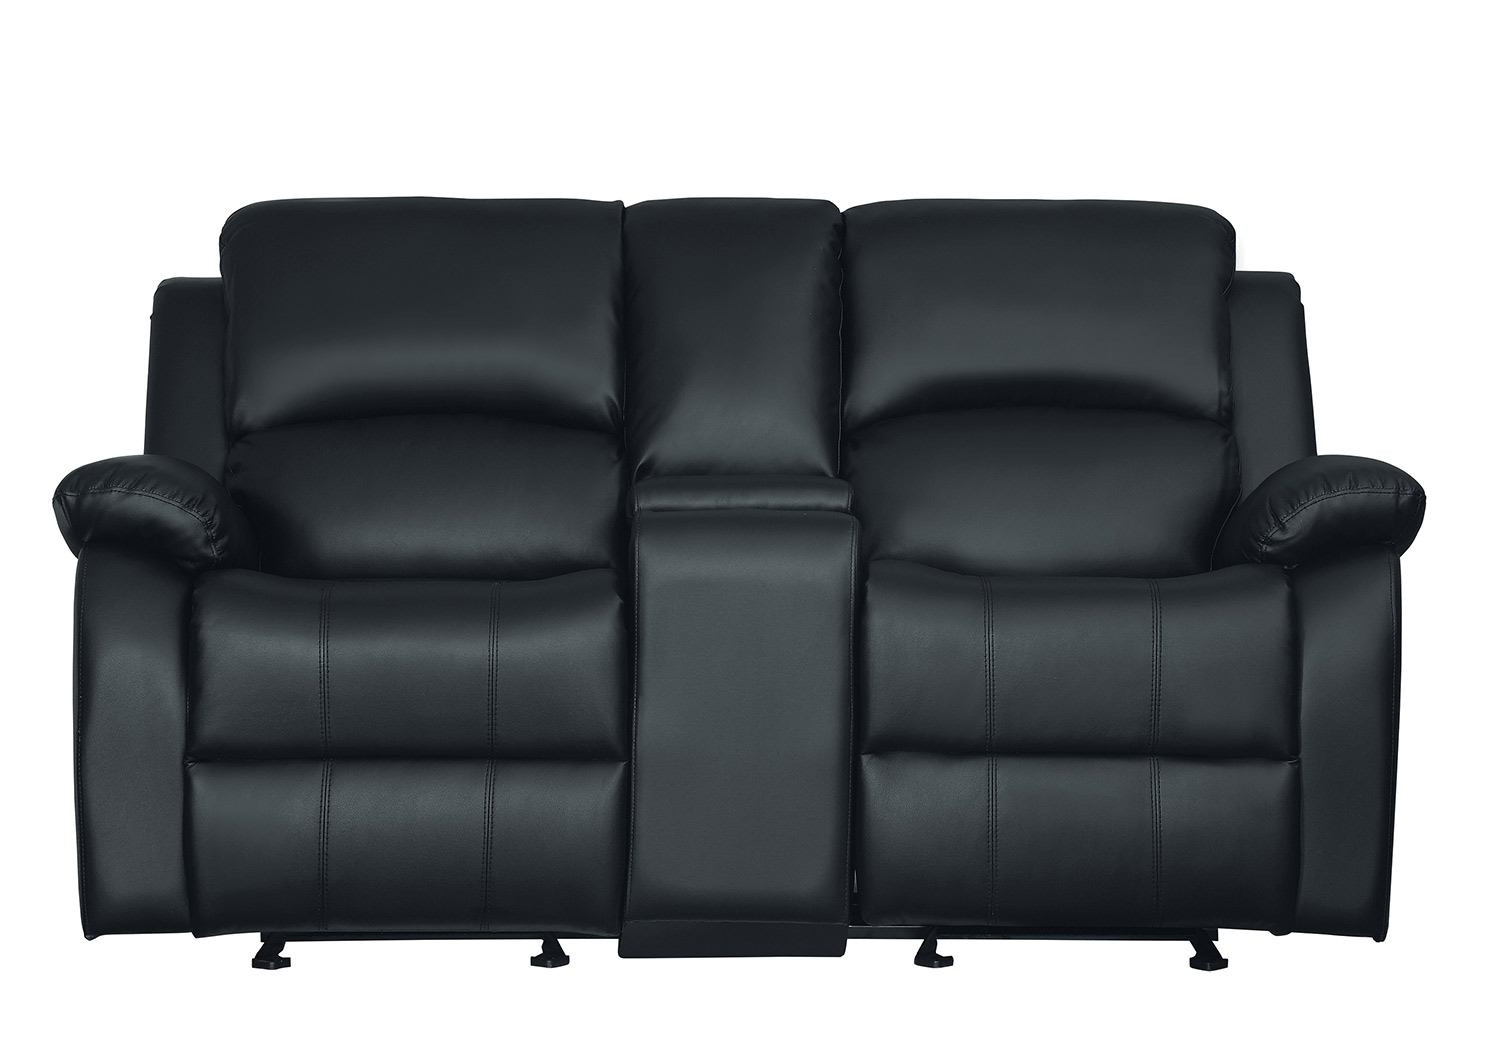 Homelegance Clarkdale Double Glider Reclining Love Seat With Center Console - Black